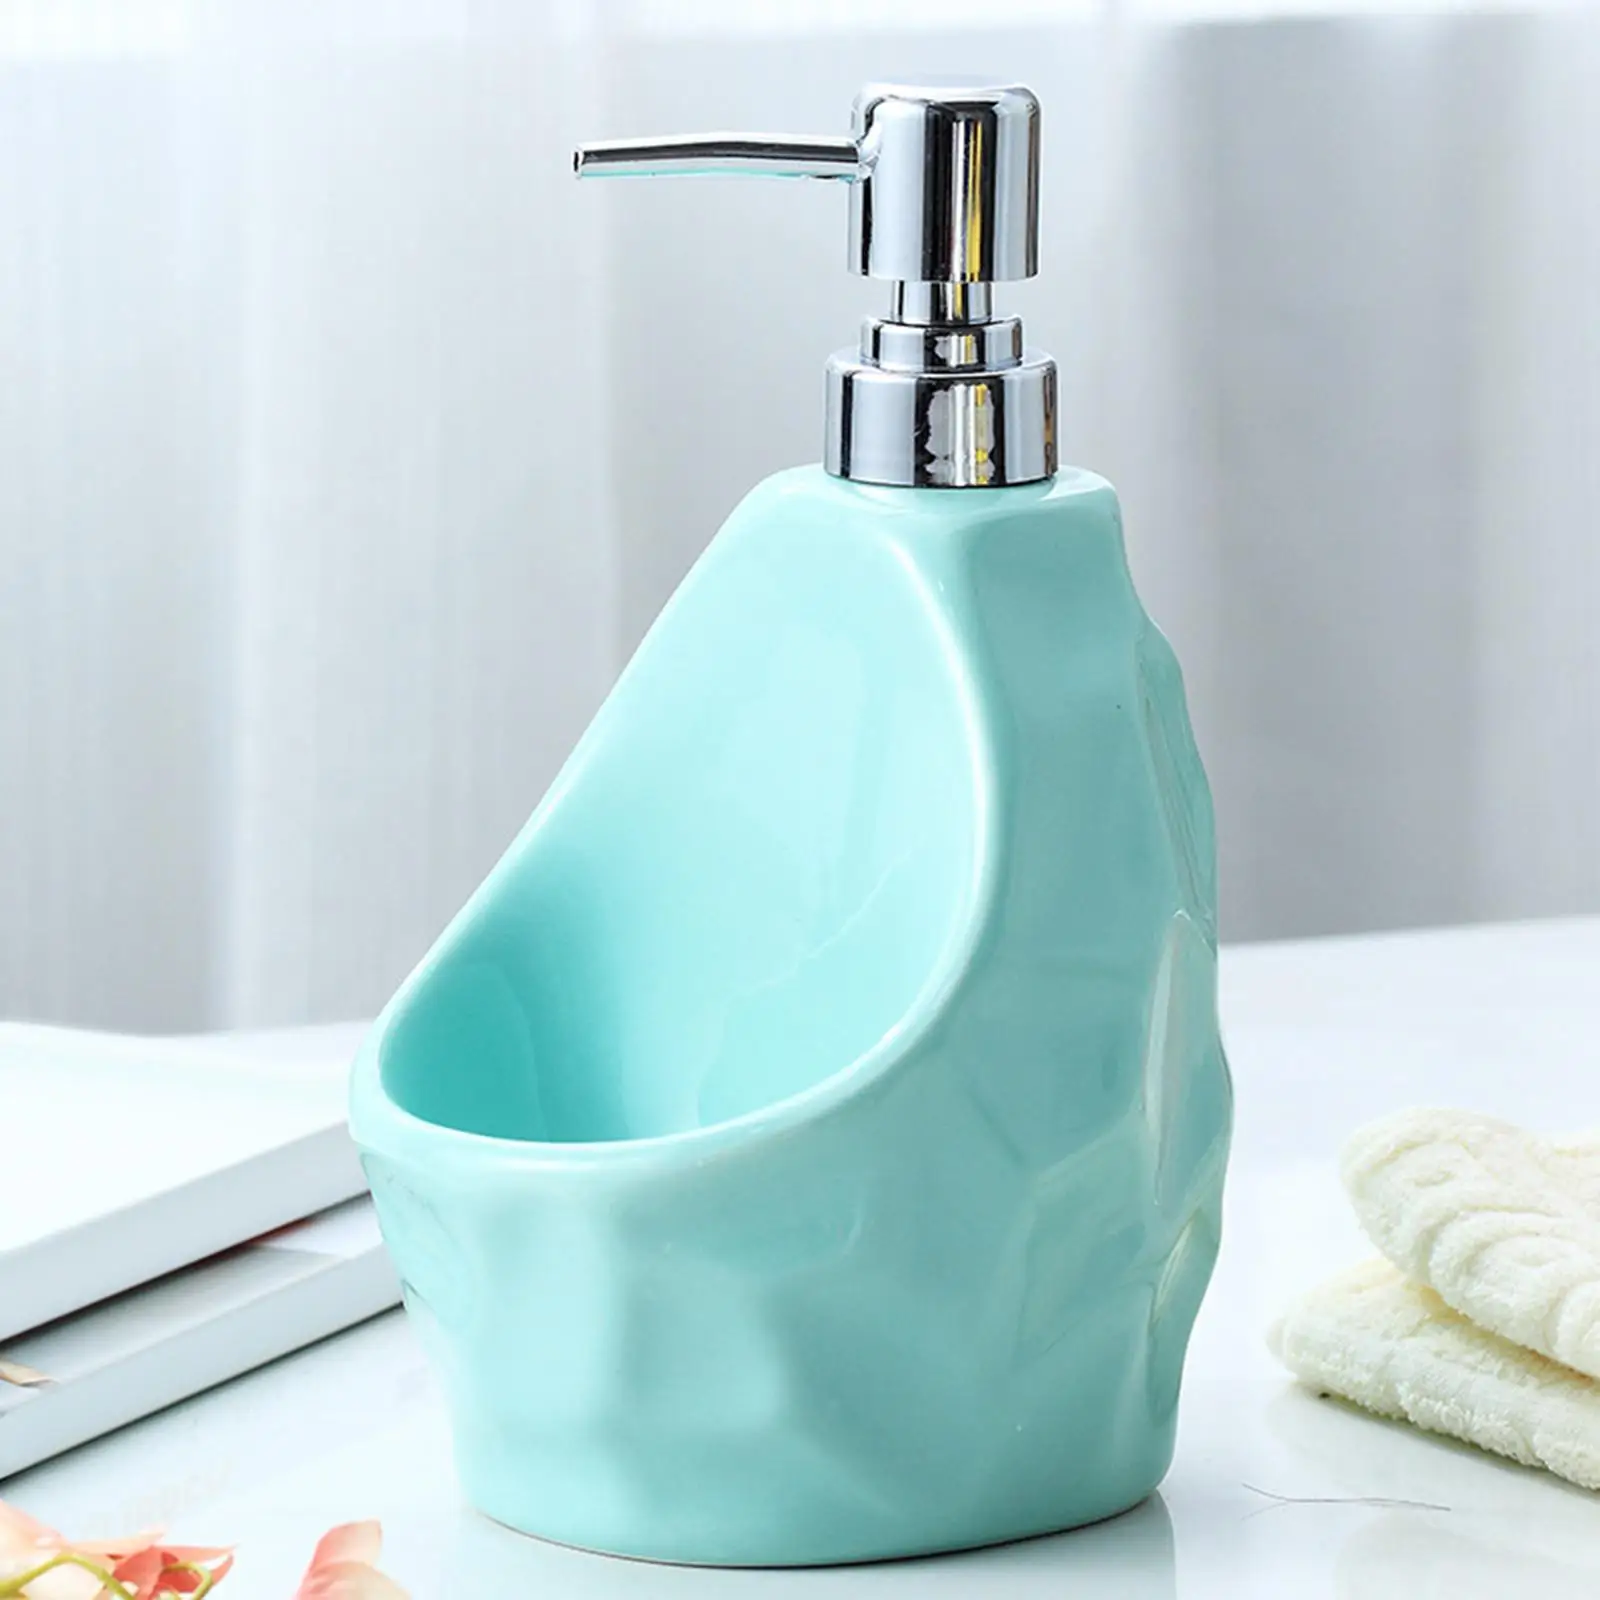 650ml Soap Dispenser Holds Stores Sponges Scrubbers Brushes Lotion Dispensers Empty Container for Soap Bathroom shampoo